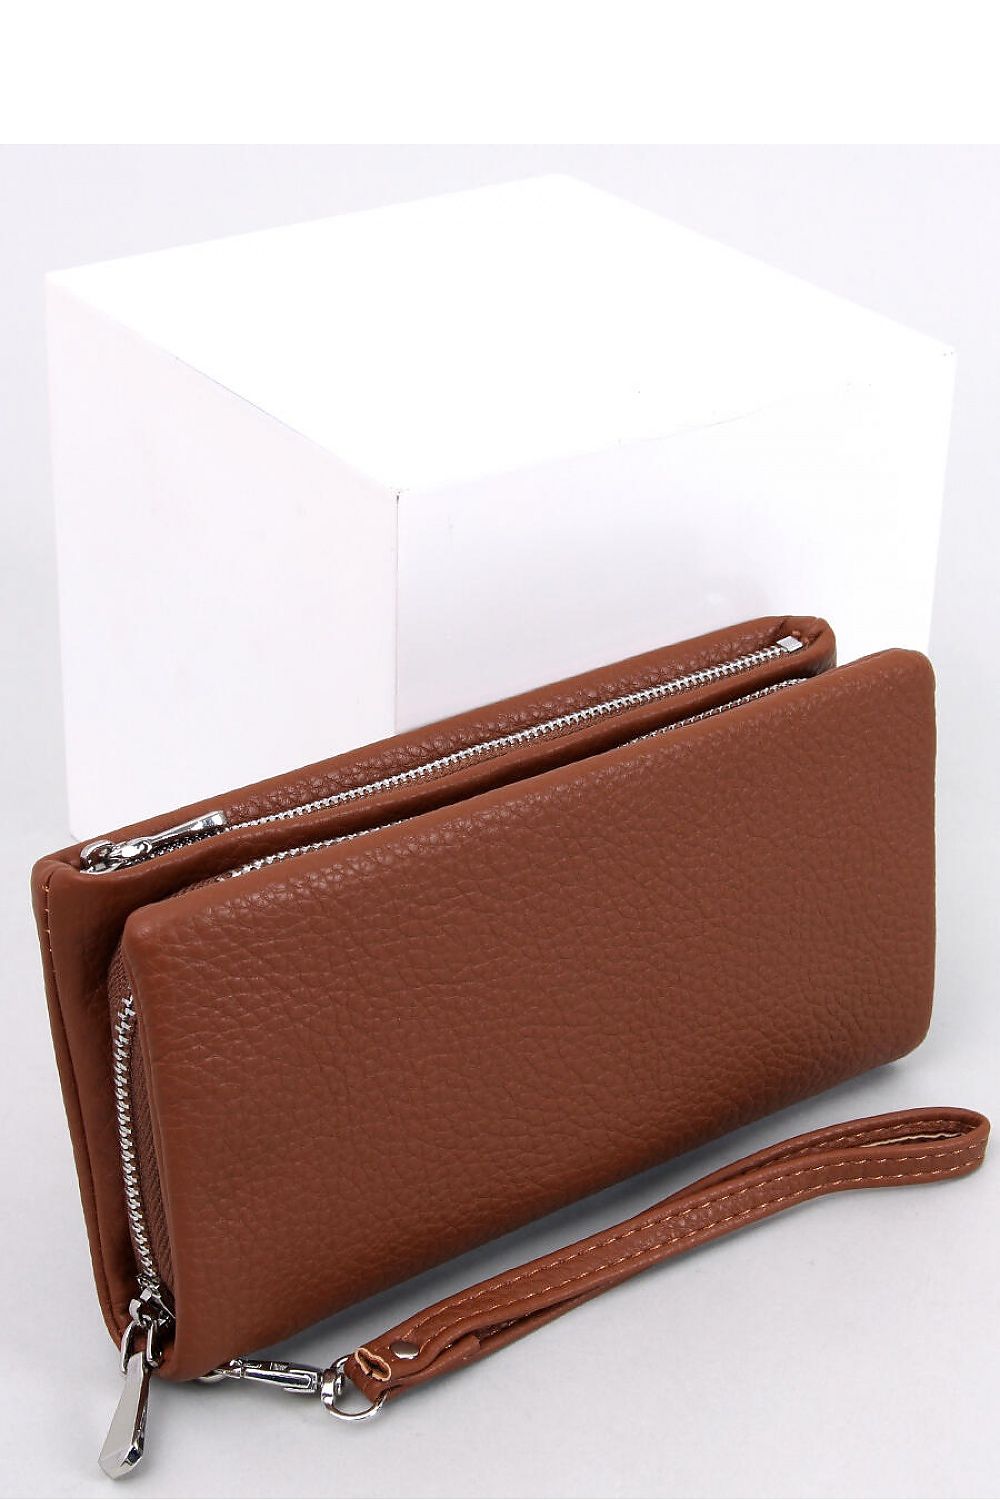 Women`s wallet - M&H FashionWomen`s walletM&H FashionM&H Fashion189664_1103922one-size-fits-allwallet InelloM&H FashionM&H FashionWomen's wallet with an additional strap. It is zippered and has numerous compartments, card tabs, a pocket for small coins. It is extremely practical - see for yoursWomen`s wallet